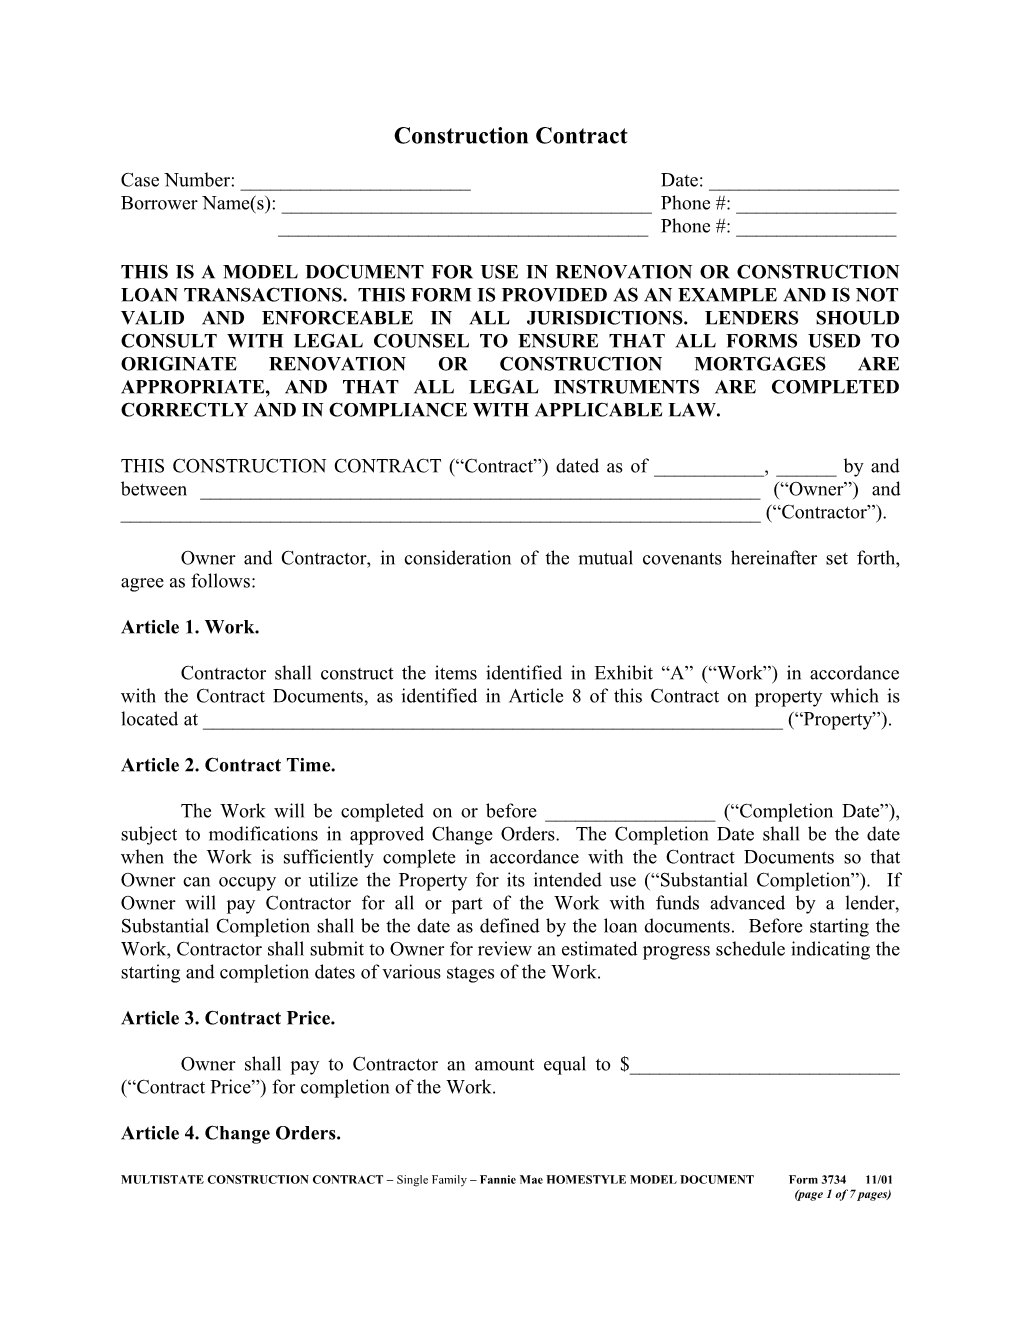 Multistate Construction Contract (Form 3734): Word